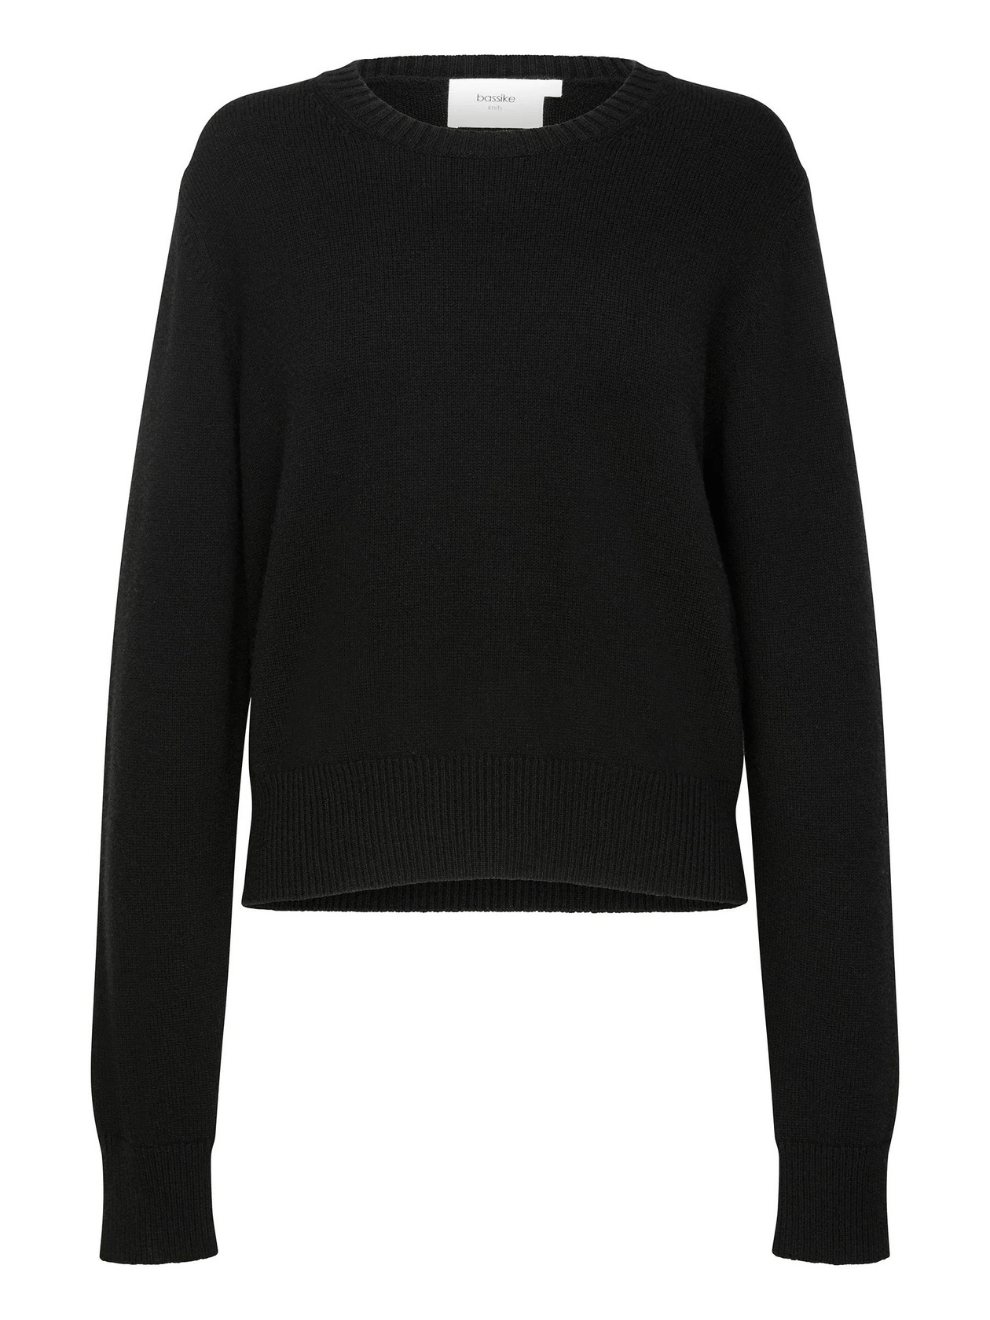 Wool Cashmere Classic Knit in Black